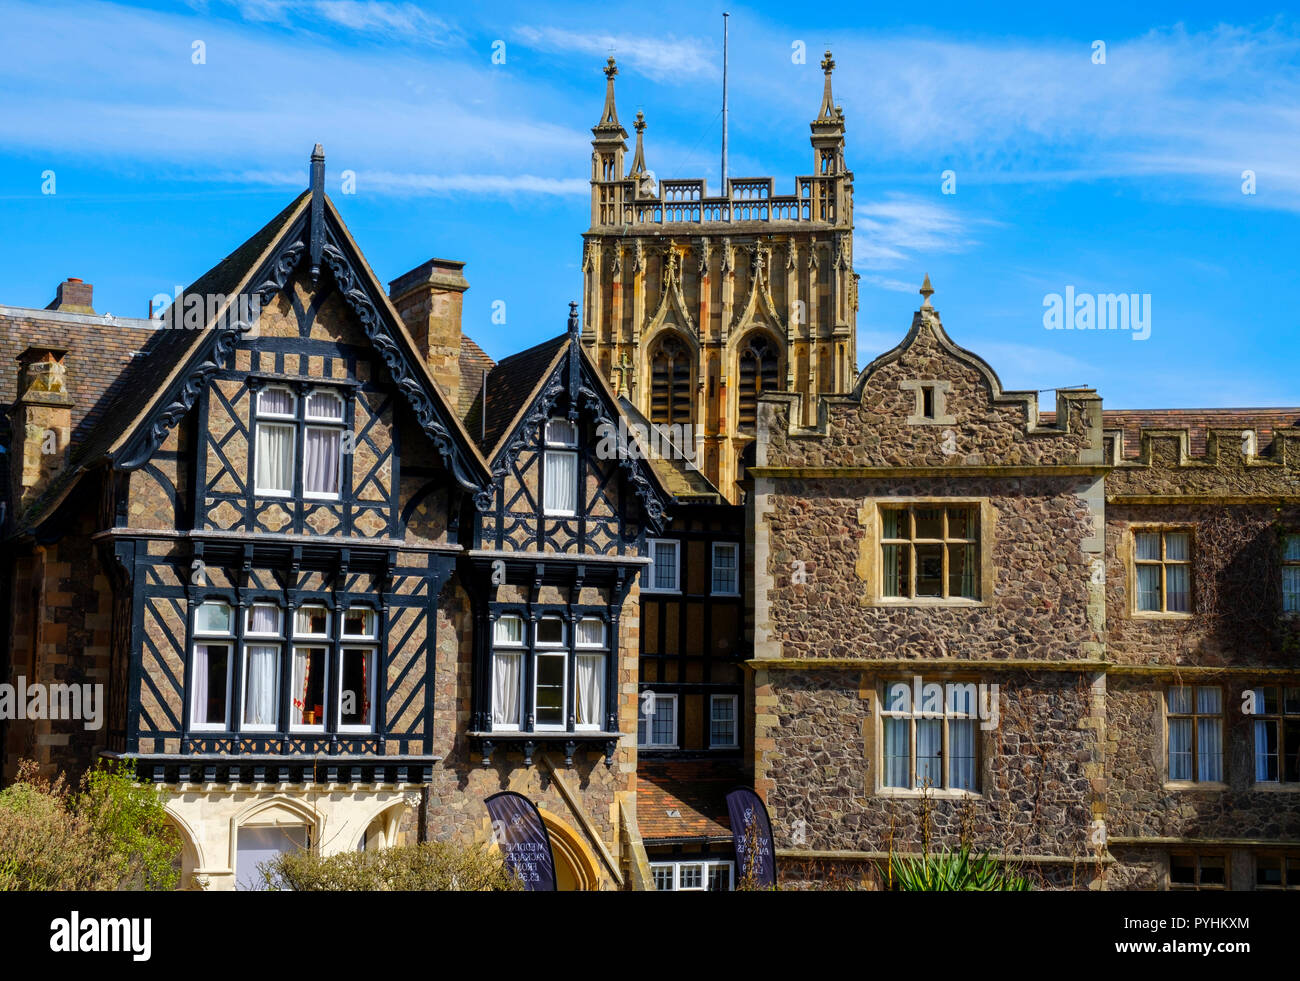 Great Malvern Priory, Abbey Gateway and Hotel, Great Malvern, Worcestershire, England, Europe Stock Photo